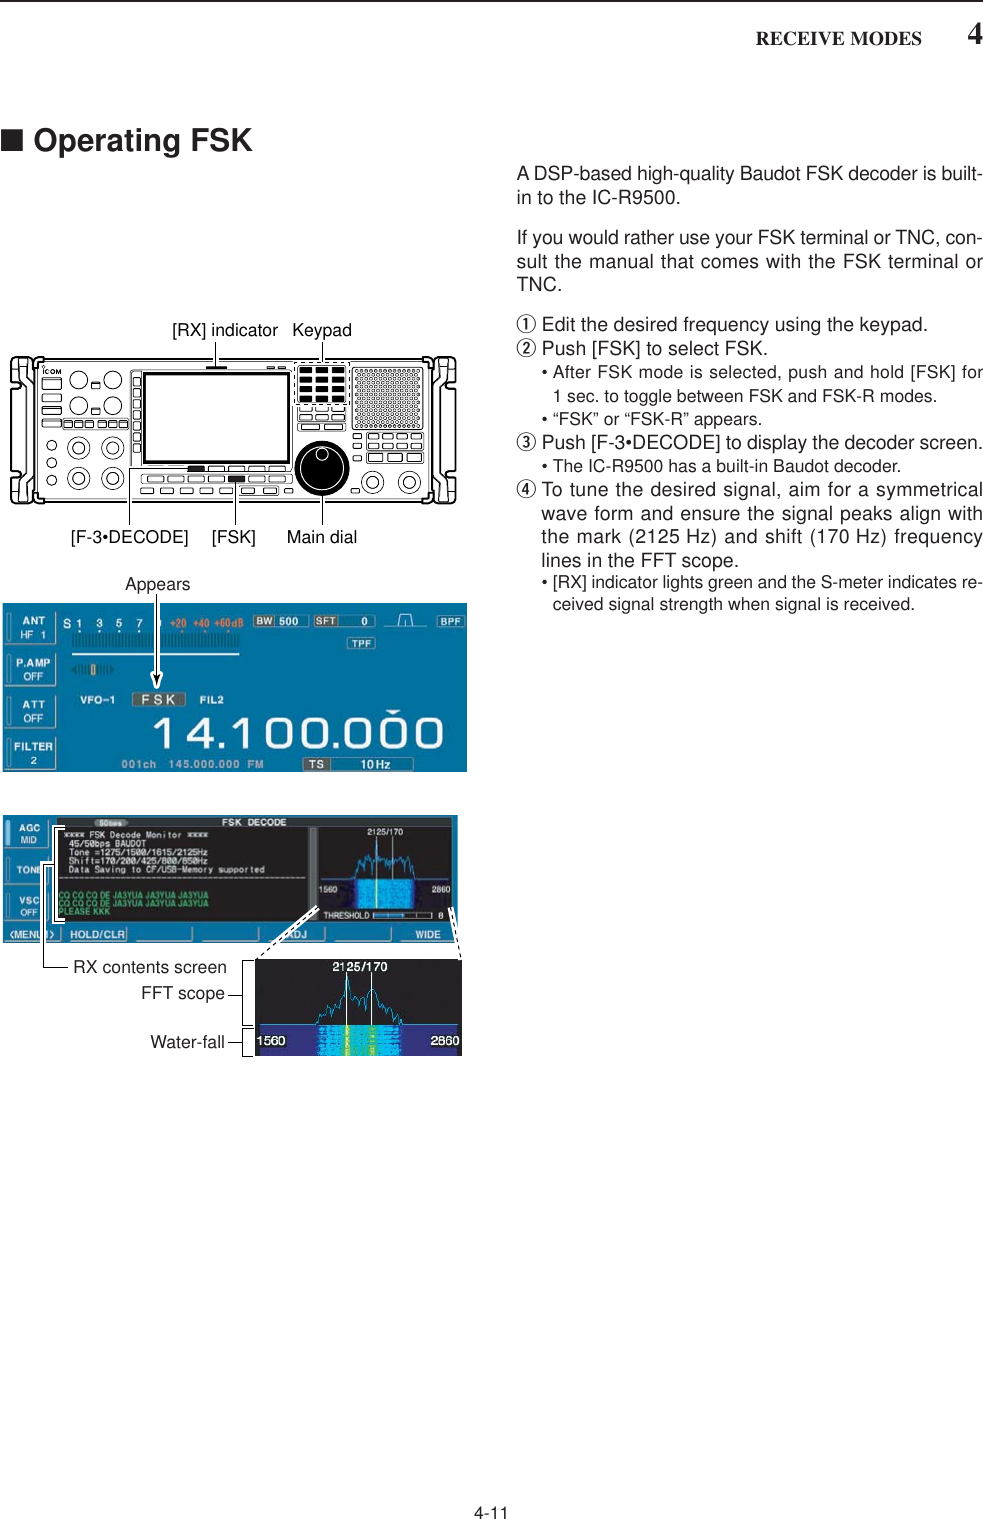 4-114RECEIVE MODES■Operating FSKA DSP-based high-quality Baudot FSK decoder is built-in to the IC-R9500.If you would rather use your FSK terminal or TNC, con-sult the manual that comes with the FSK terminal orTNC.qEdit the desired frequency using the keypad.wPush [FSK] to select FSK.• After FSK mode is selected, push and hold [FSK] for1 sec. to toggle between FSK and FSK-R modes.• “FSK” or “FSK-R” appears.ePush [F-3•DECODE] to display the decoder screen.• The IC-R9500 has a built-in Baudot decoder.rTo tune the desired signal, aim for a symmetricalwave form and ensure the signal peaks align withthe mark (2125 Hz) and shift (170 Hz) frequencylines in the FFT scope. • [RX] indicator lights green and the S-meter indicates re-ceived signal strength when signal is received.FFT scopeRX contents screenWater-fallAppearsKeypad[RX] indicator[F-3•DECODE] [FSK] Main dial